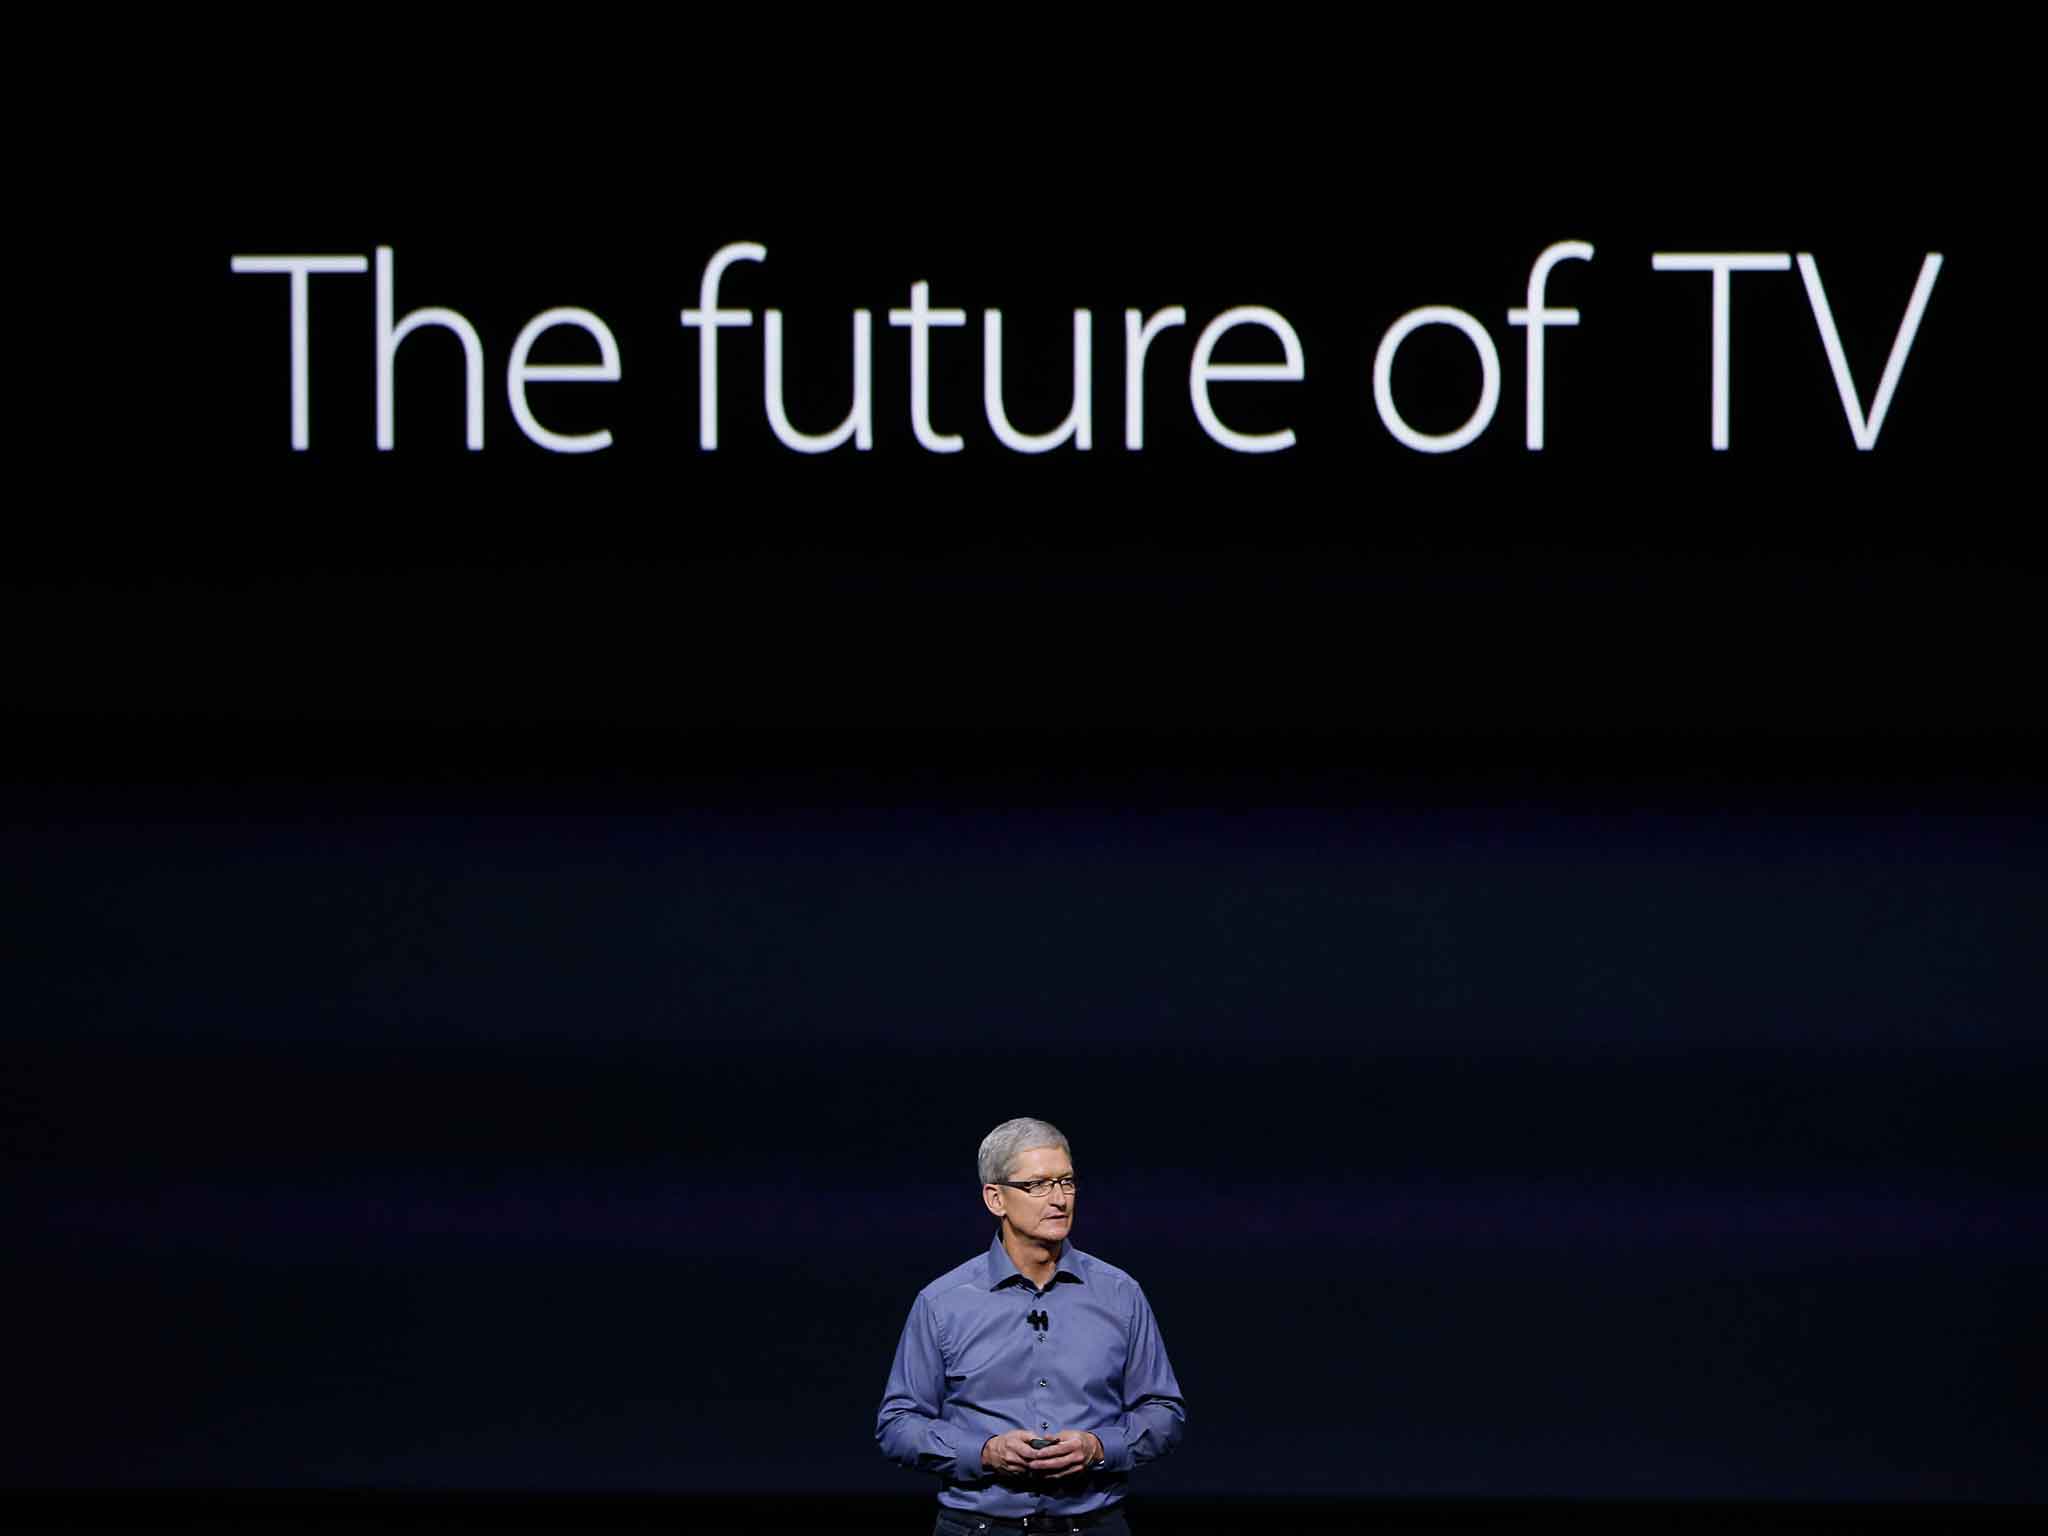 Tim Cook introduces the New Apple TV